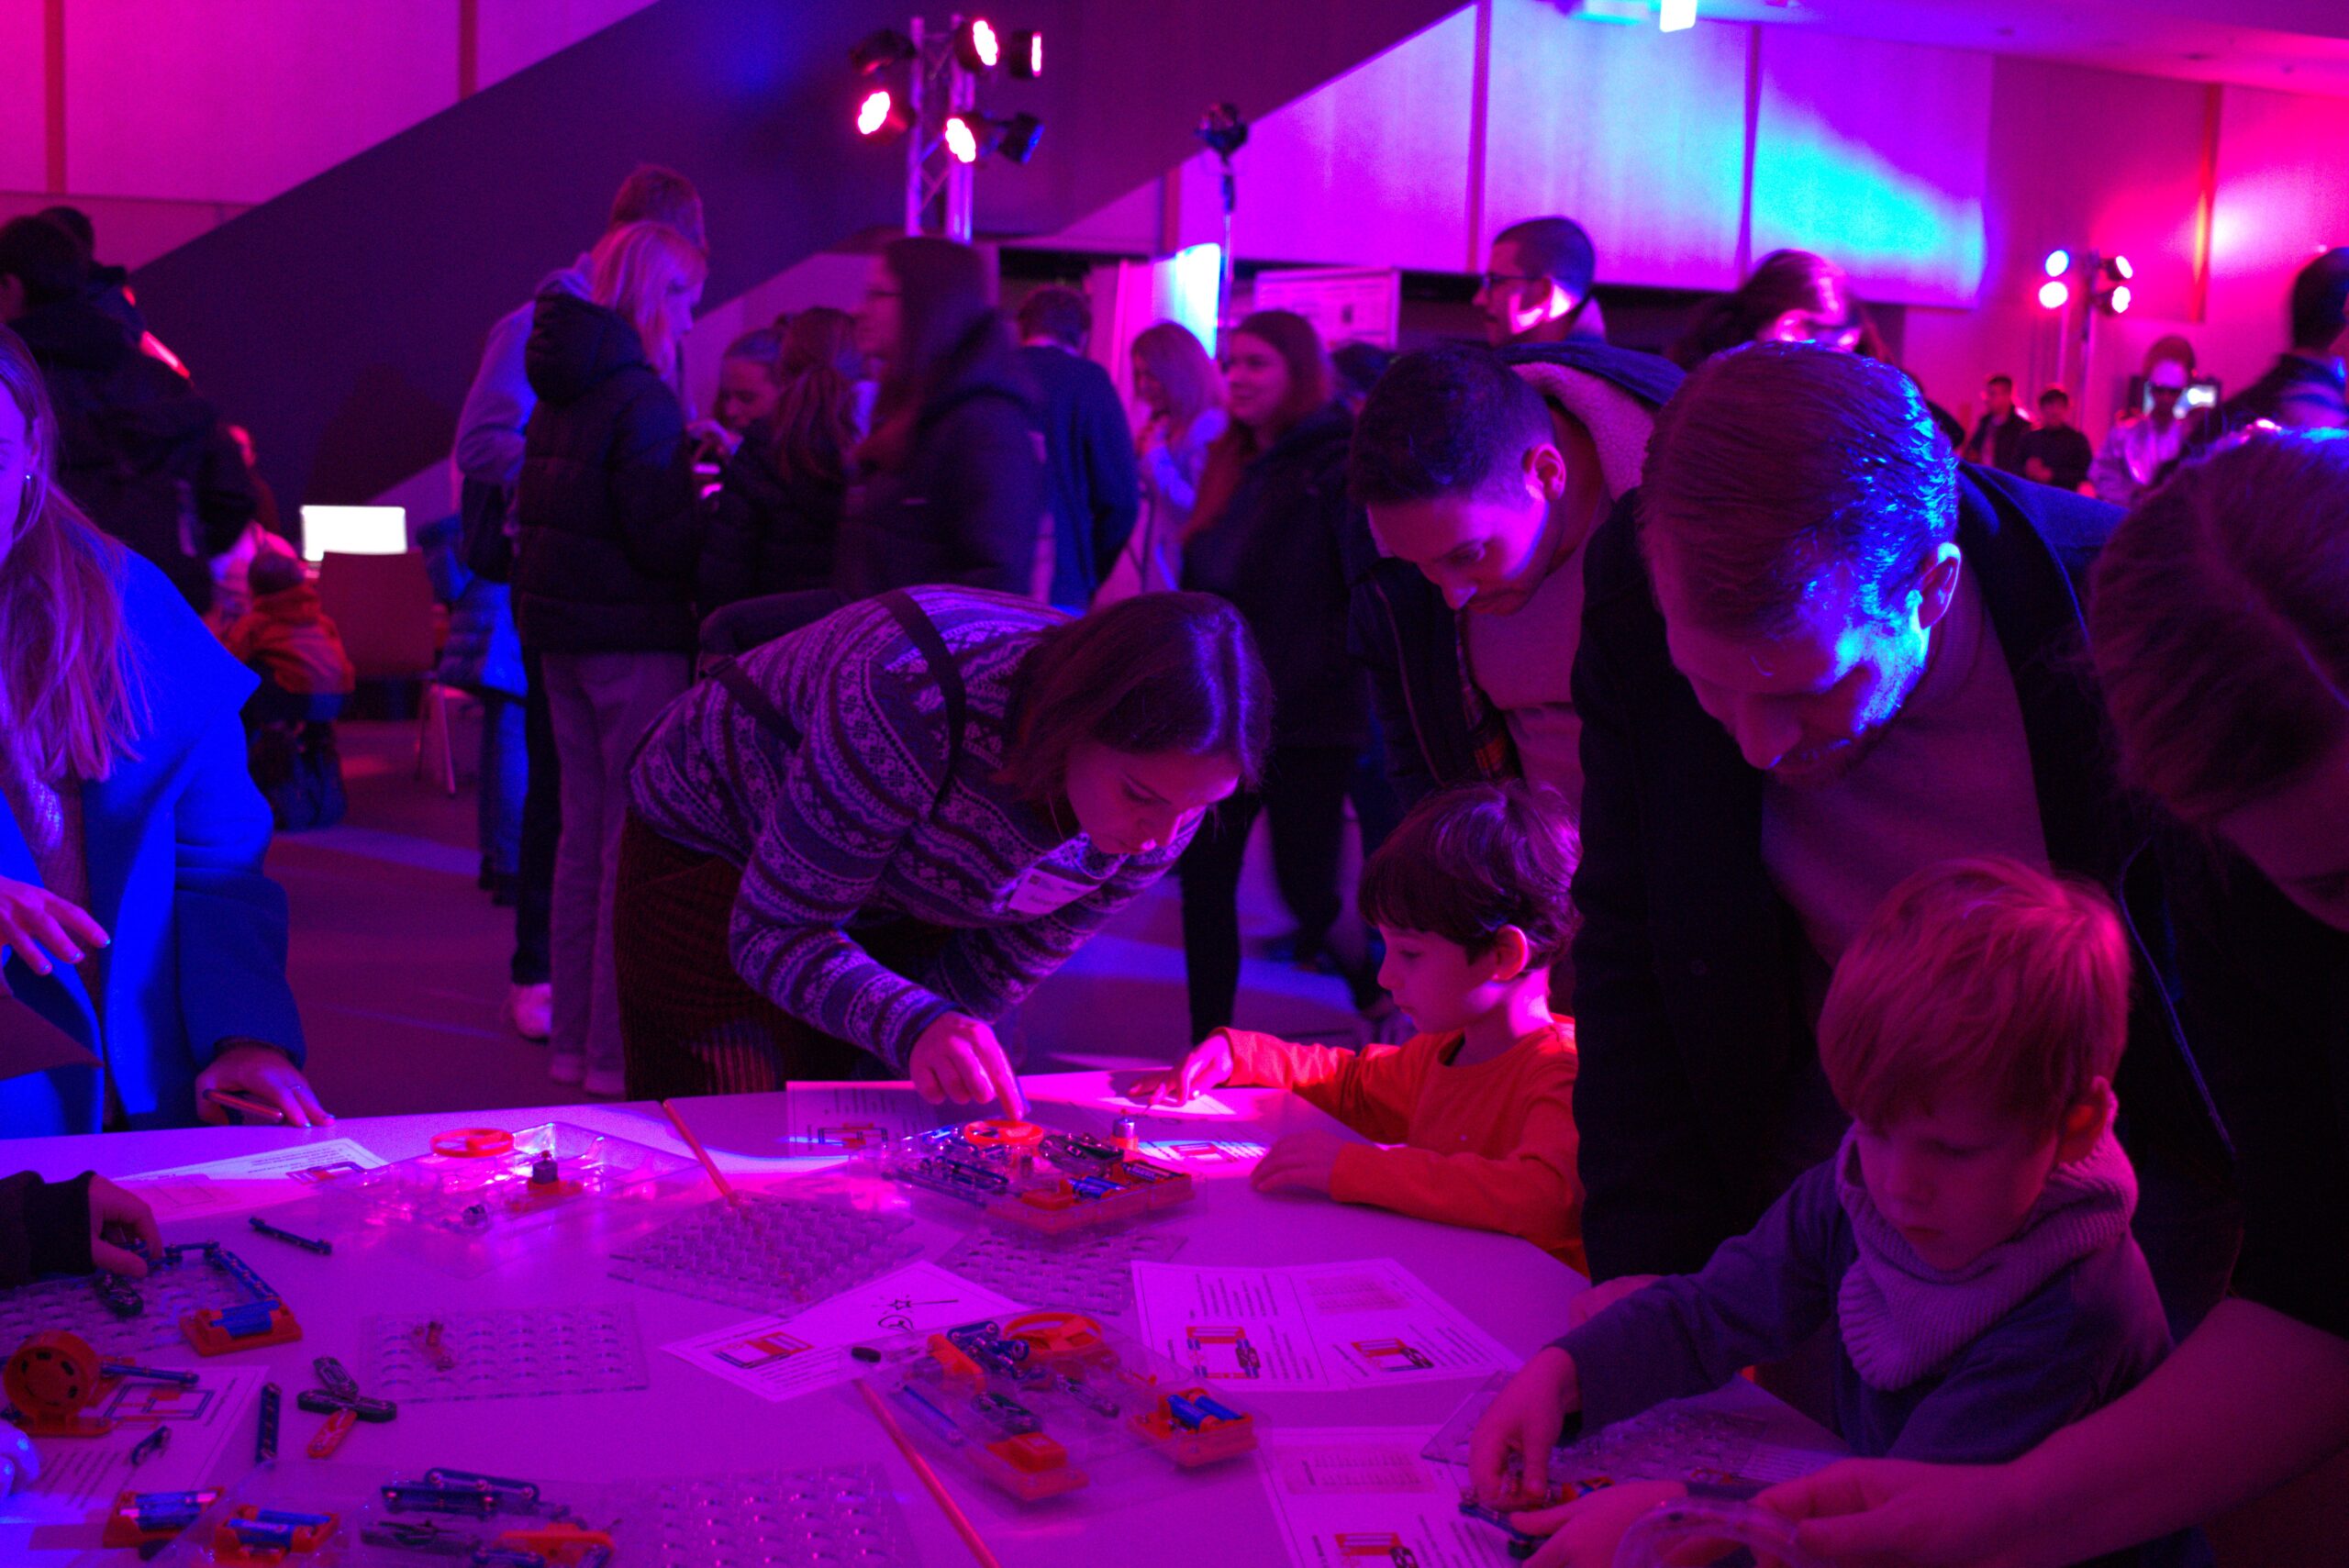 Children sit at a table equipped with electronic construction kits and are guided by adults. In the background, other people are on the move in the event room.